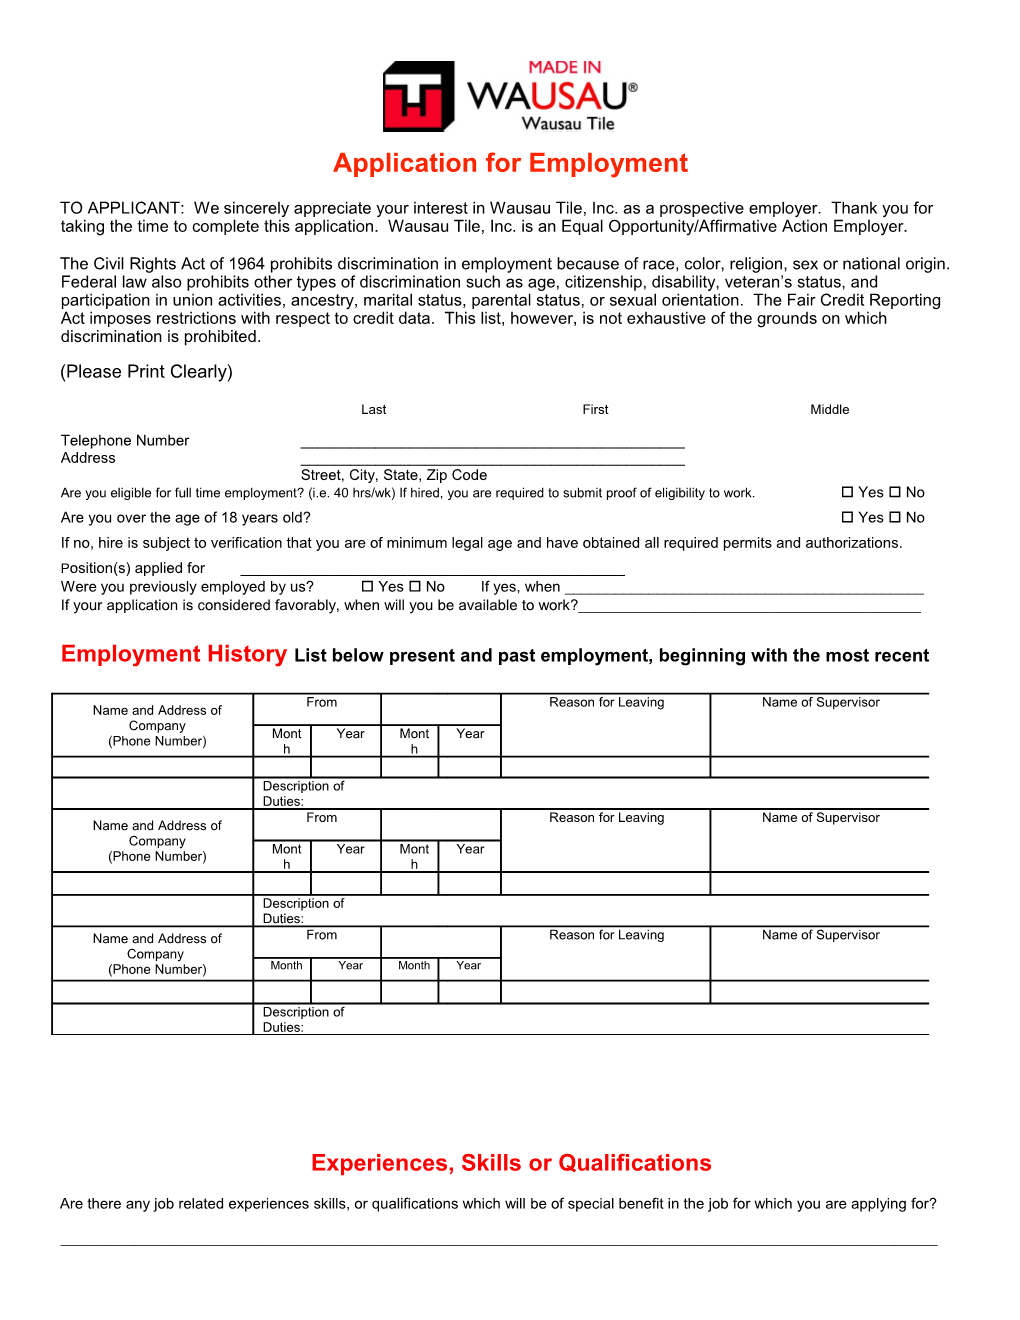 WT Employment Application.Pages